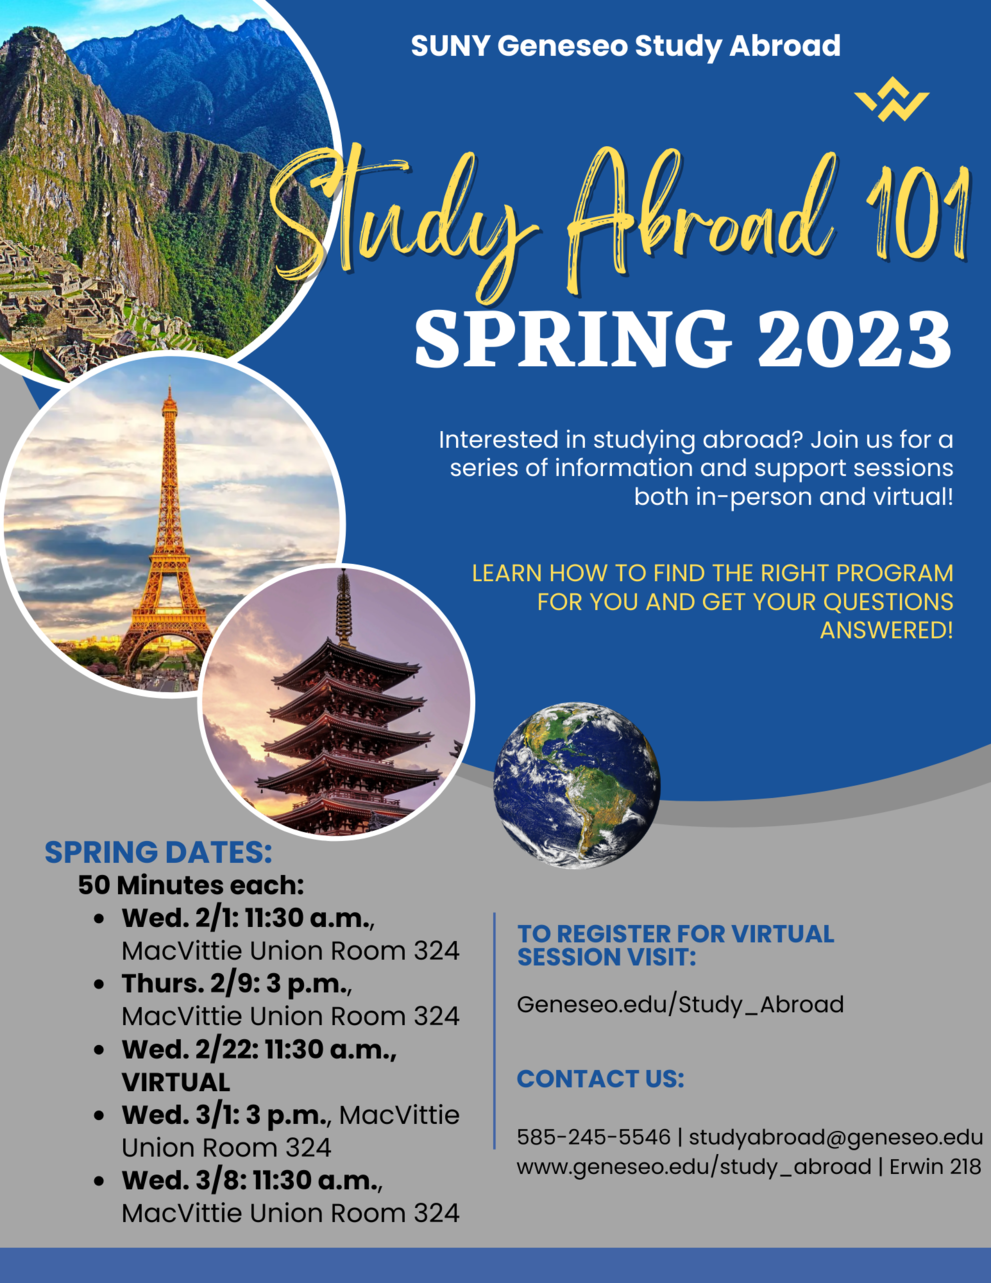 Spring 2023 study abroad 101 information sessions open to all students interested in studying abroad will be offered in-person on Wednesday, February 1st at 11:30 a.m., in MacVittie Union Room 324; Thursday, February 9th at 3 p.m. in Union Room 324; Wednesday, March 1st at 3 p.m. in Union Room 324; and Wednesday, March 8th at 11:30 a.m. in Union Room 324. The virtual session will take place on Wednesday, February 22nd at 11:30 a.m. and the zoom link can be found below this image on our website.